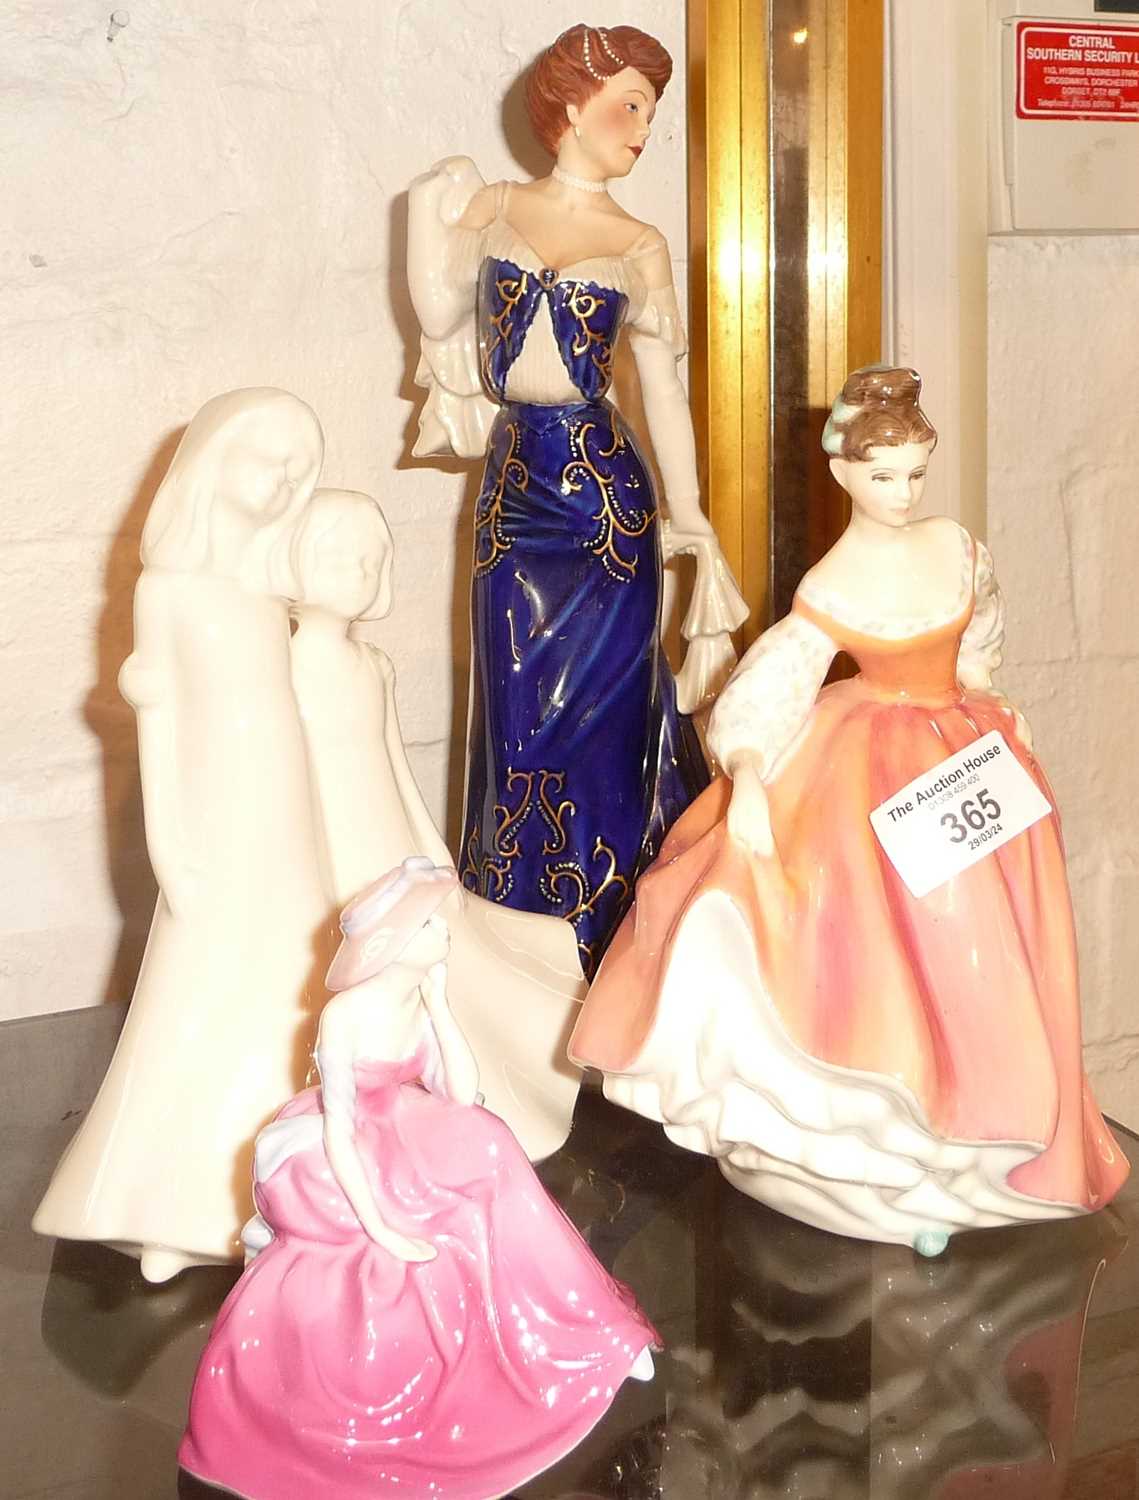 Royal Worcester figure of friendship, Royal Doulton figurine "Fair Lady" and two other china - Image 2 of 2